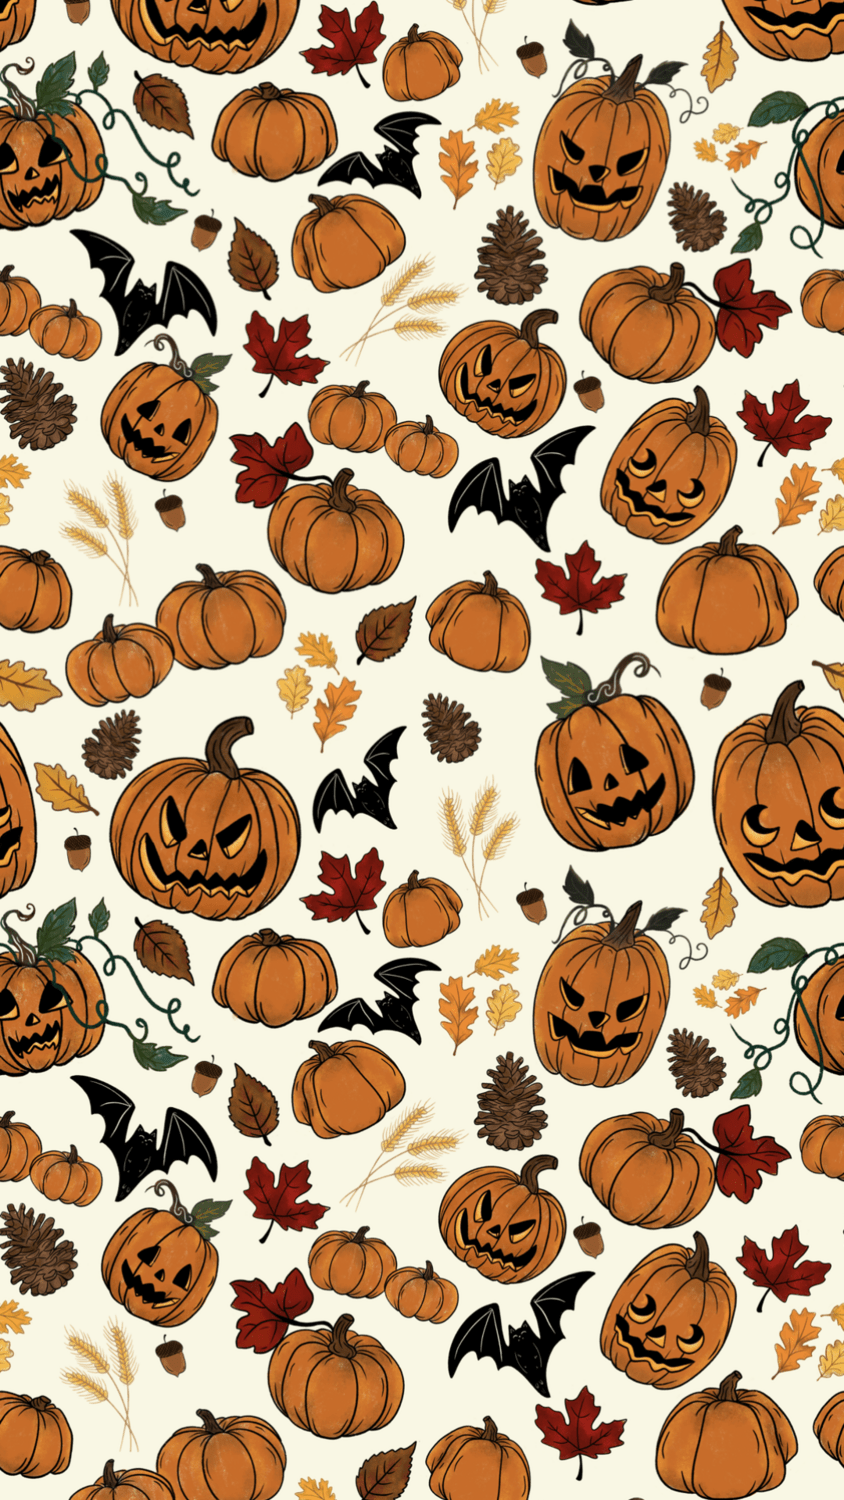 A pattern of pumpkins, bats, and leaves on a cream background. - Cute fall, pumpkin, fall iPhone